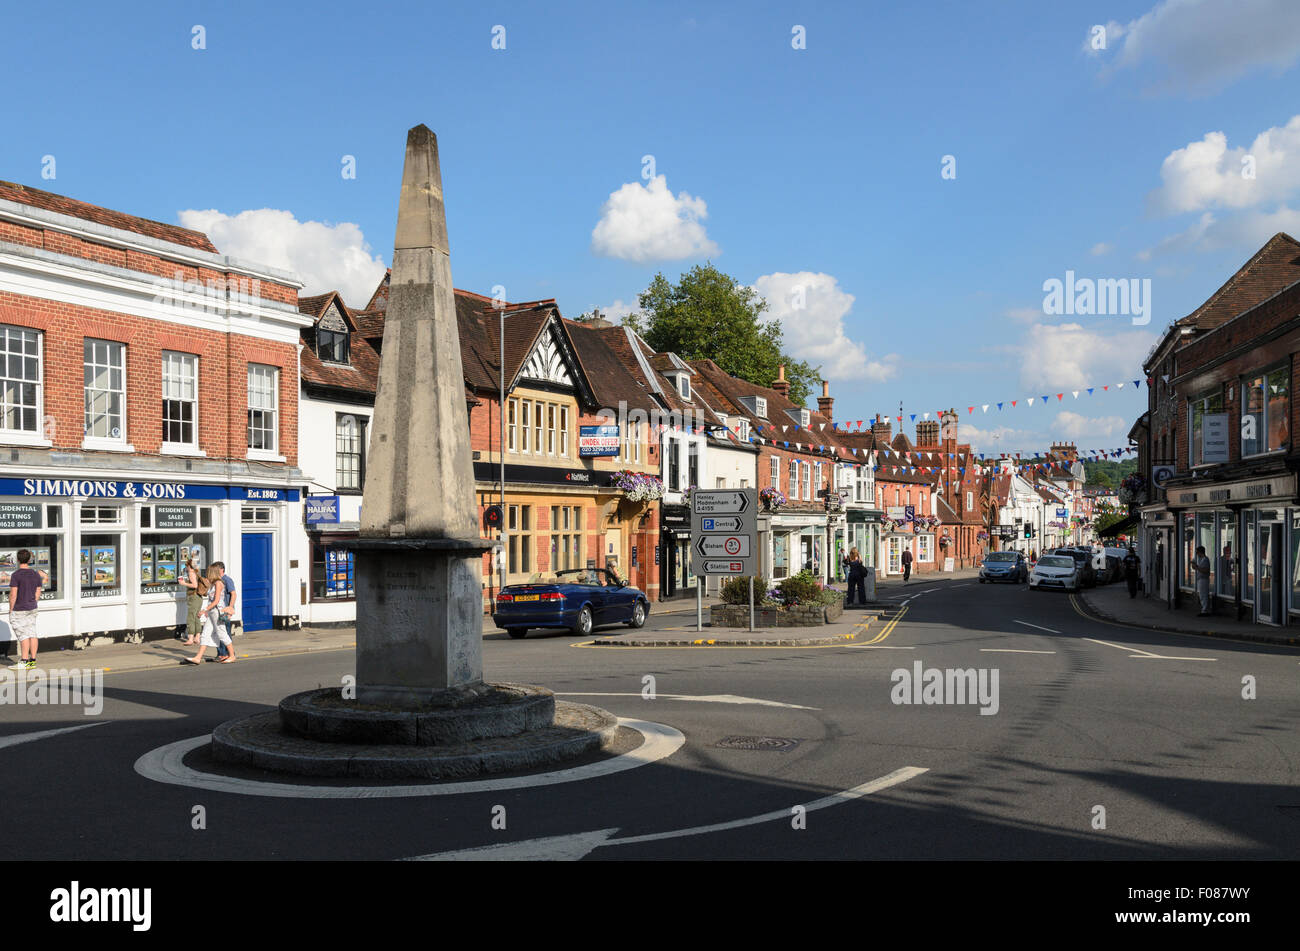 La High Street, West Wycombe, Buckinghamshire, Angleterre, Royaume-Uni. Banque D'Images